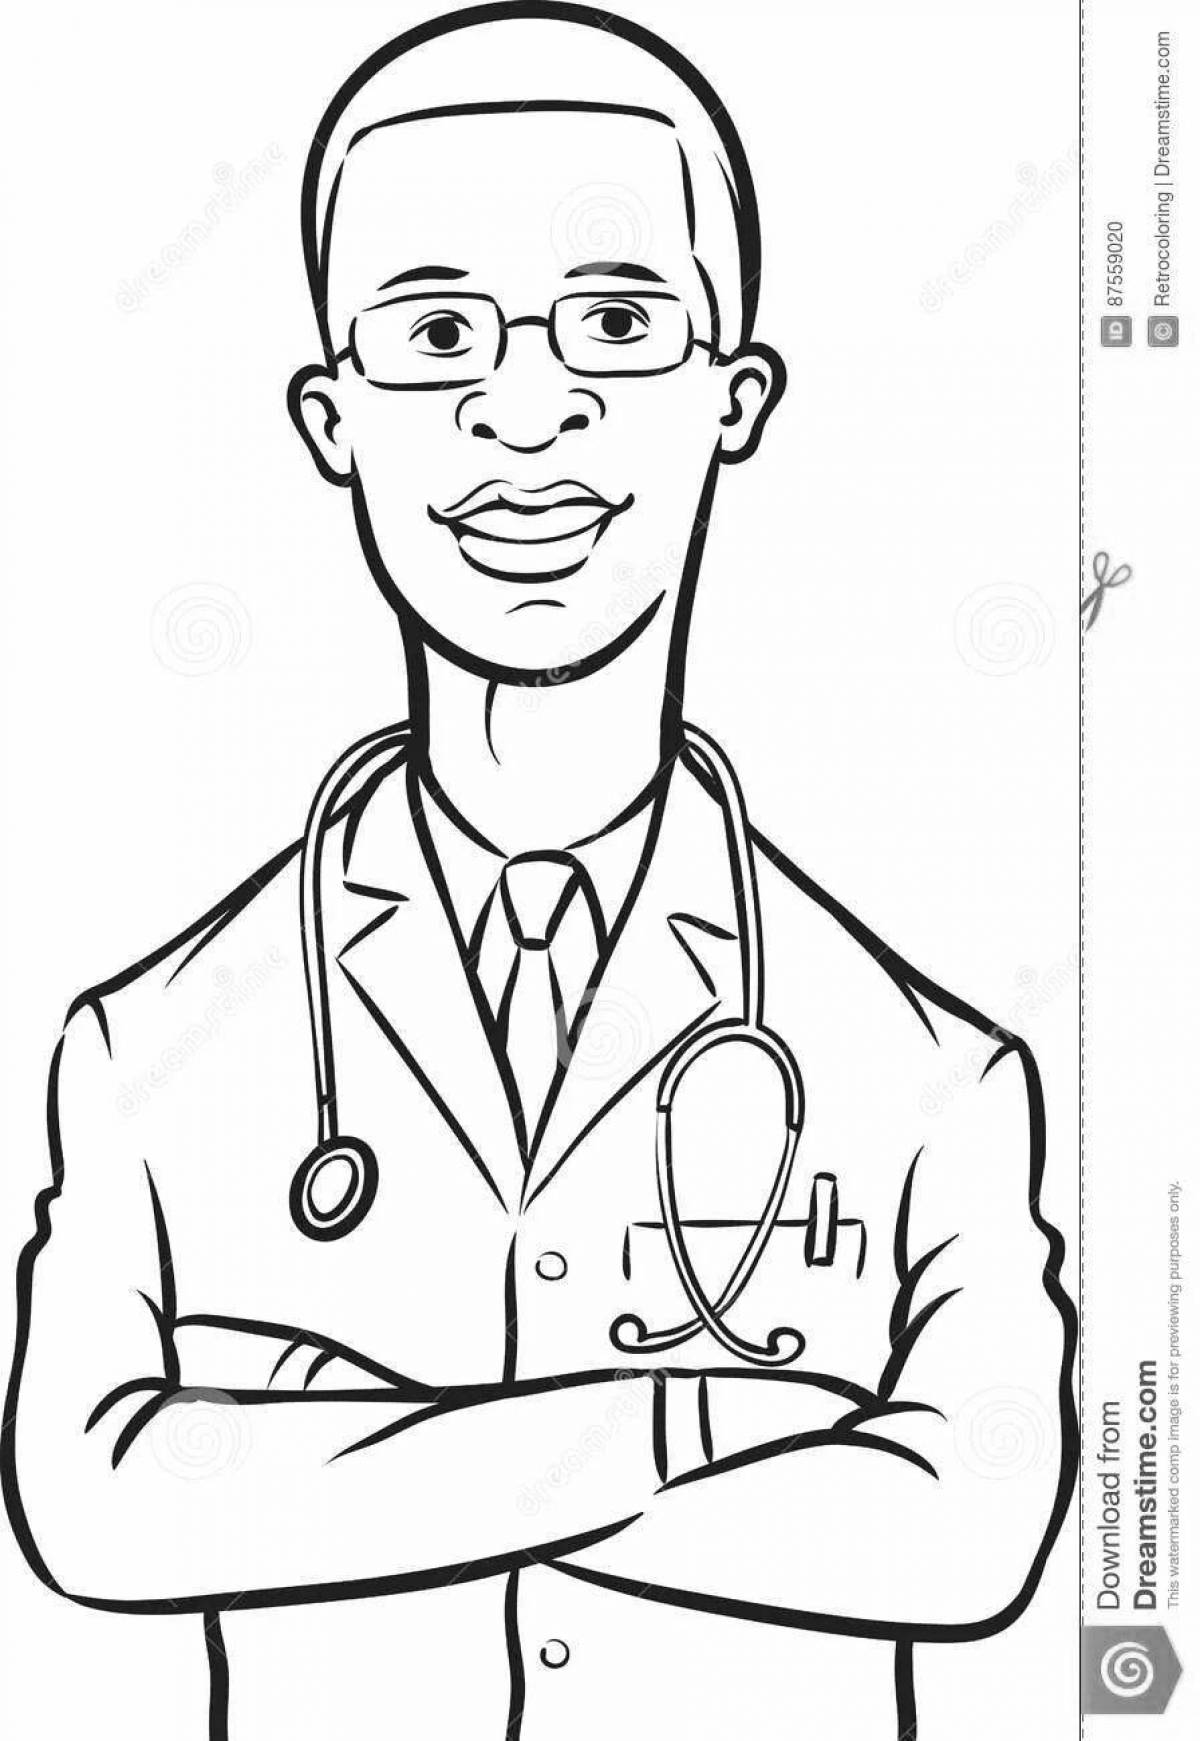 Adorable surgeon coloring page for kids